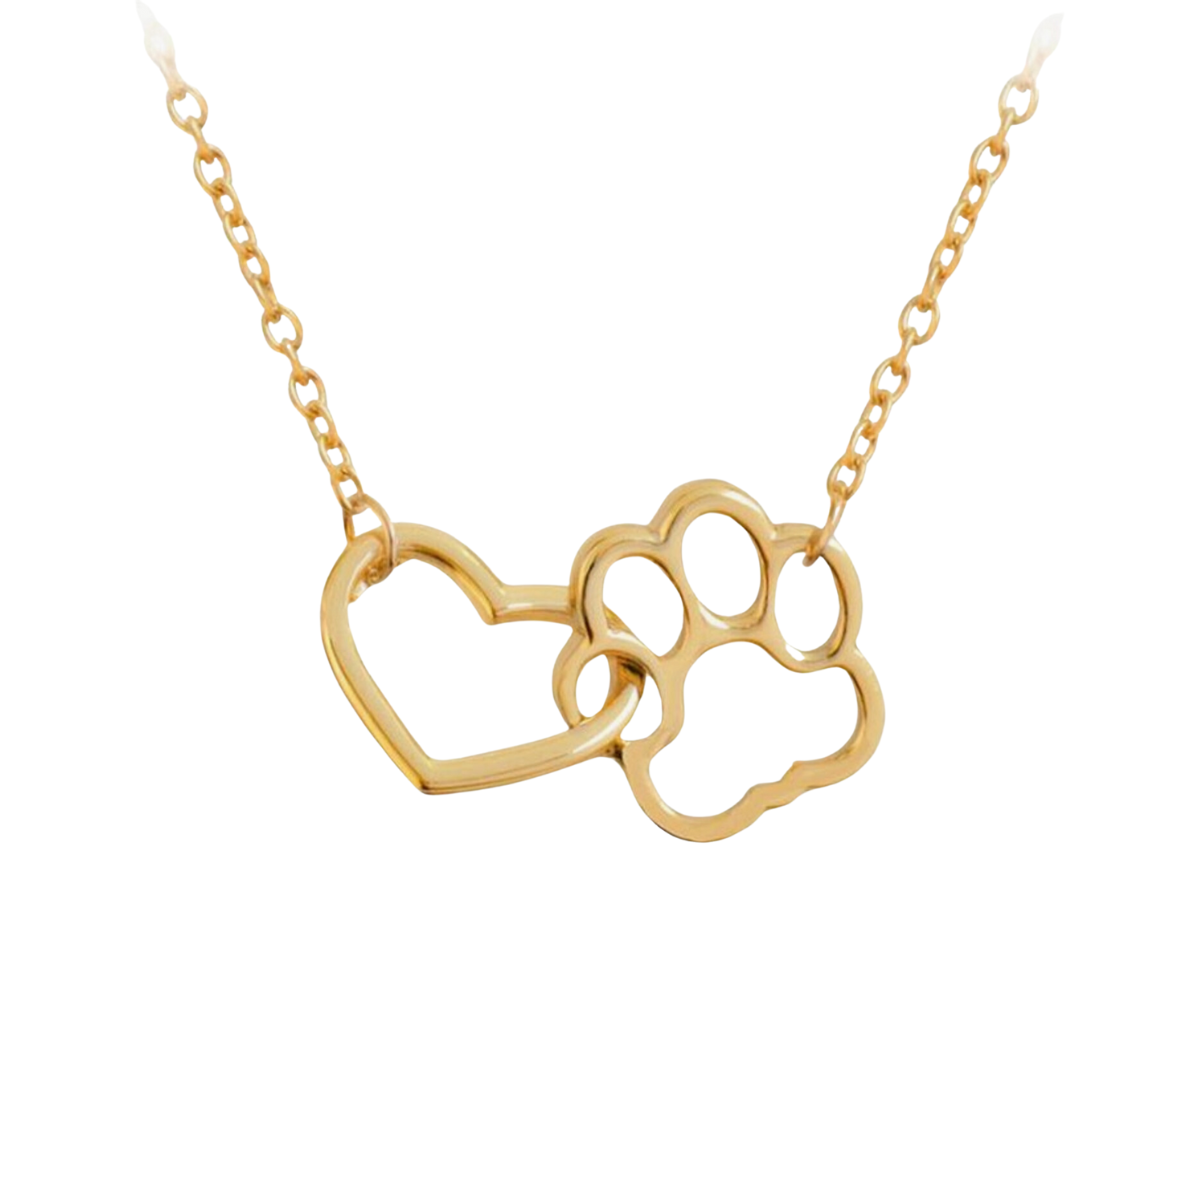 Interlocking Heart Paw Charm Stainless Steel Necklace